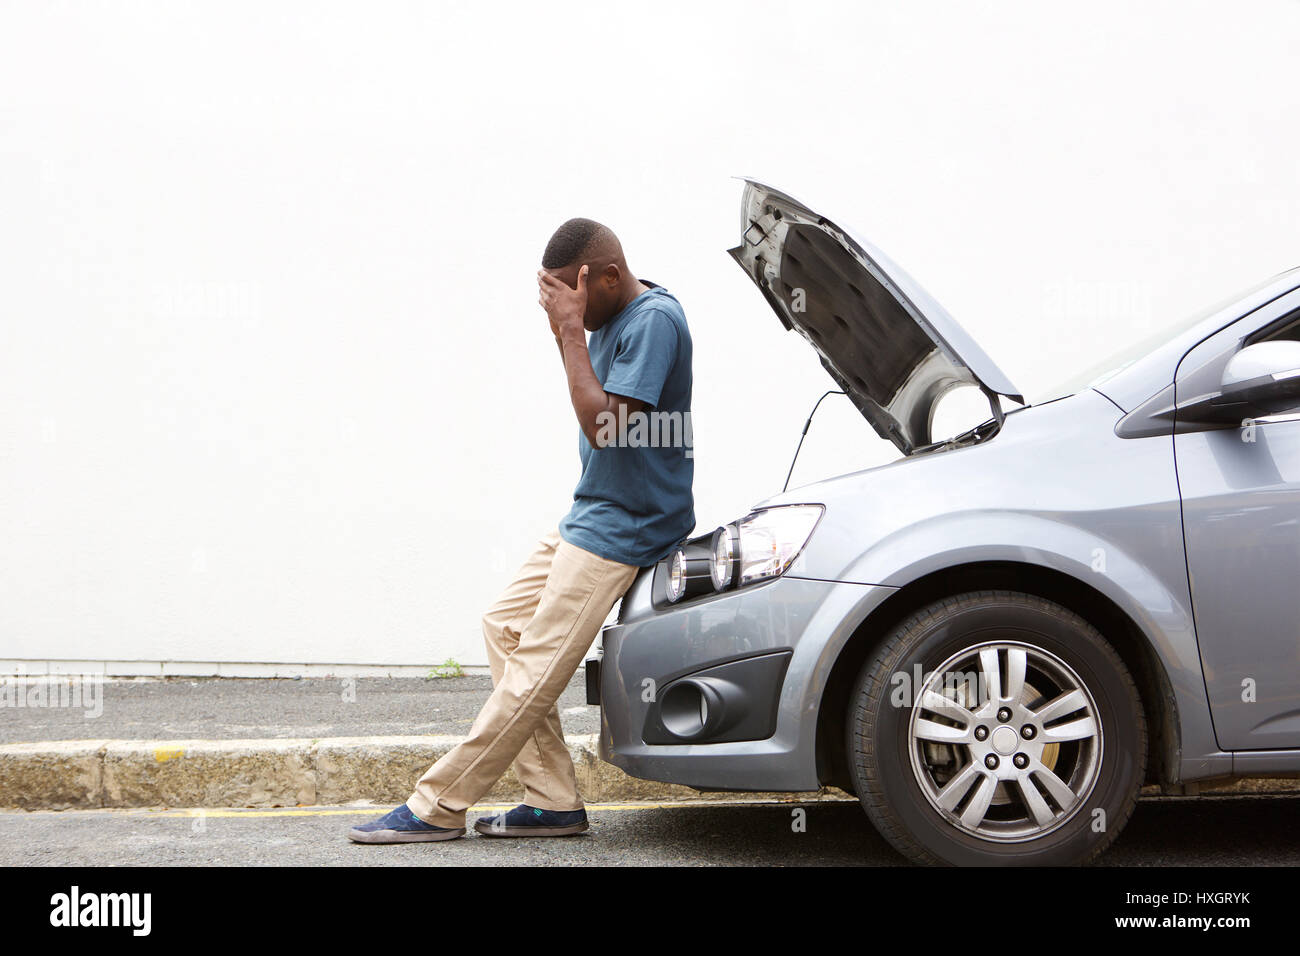 Full length portrait of upset young african man standing in front of a broken down car parked on the side of a road Stock Photo